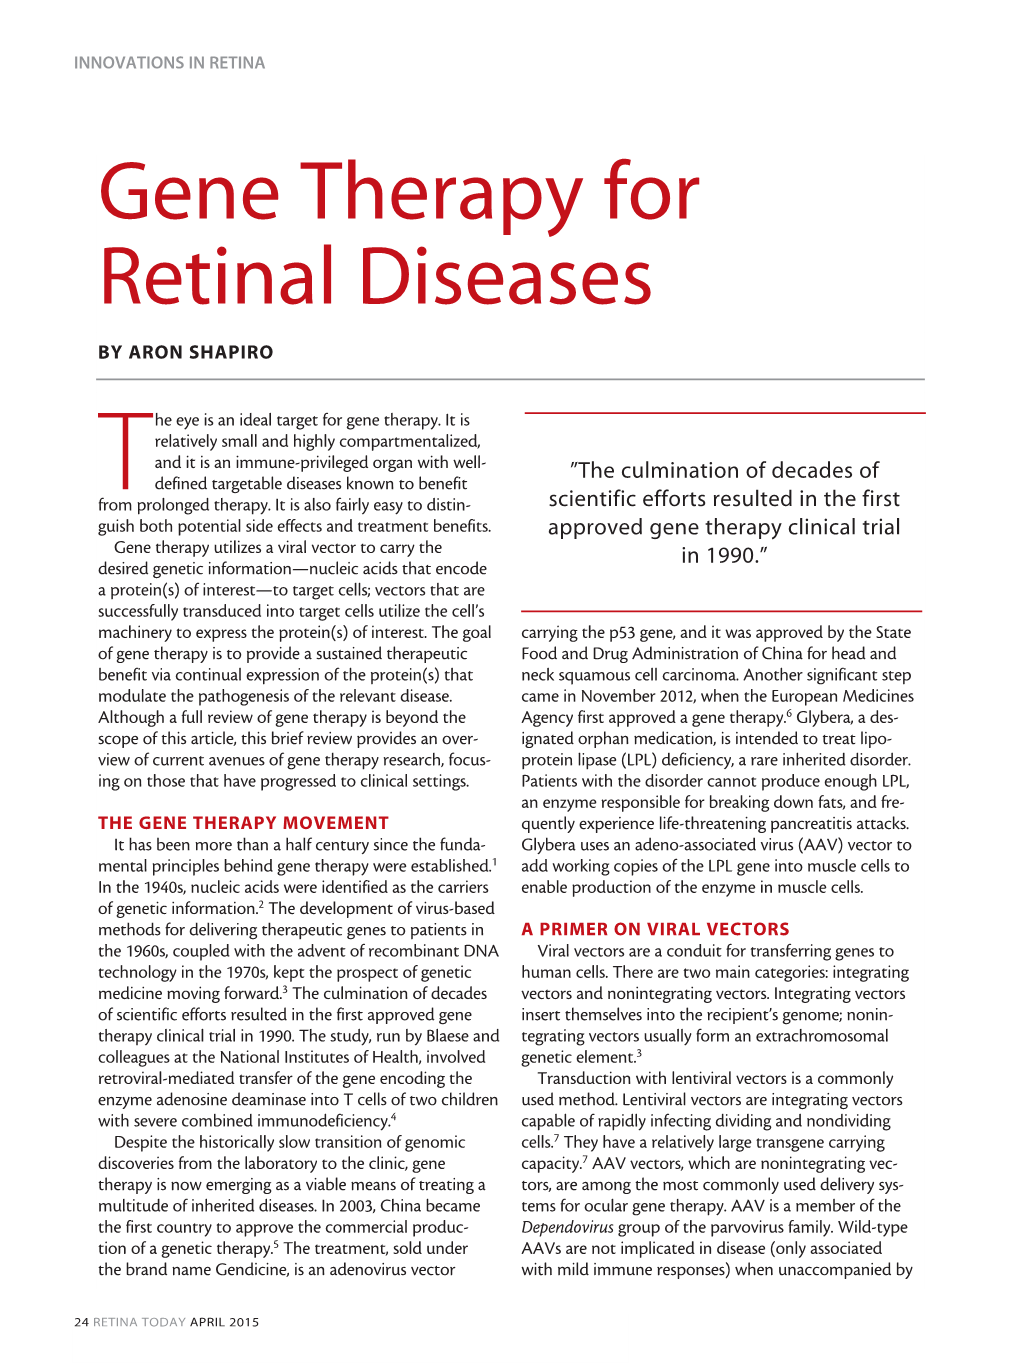 Gene Therapy for Retinal Diseases